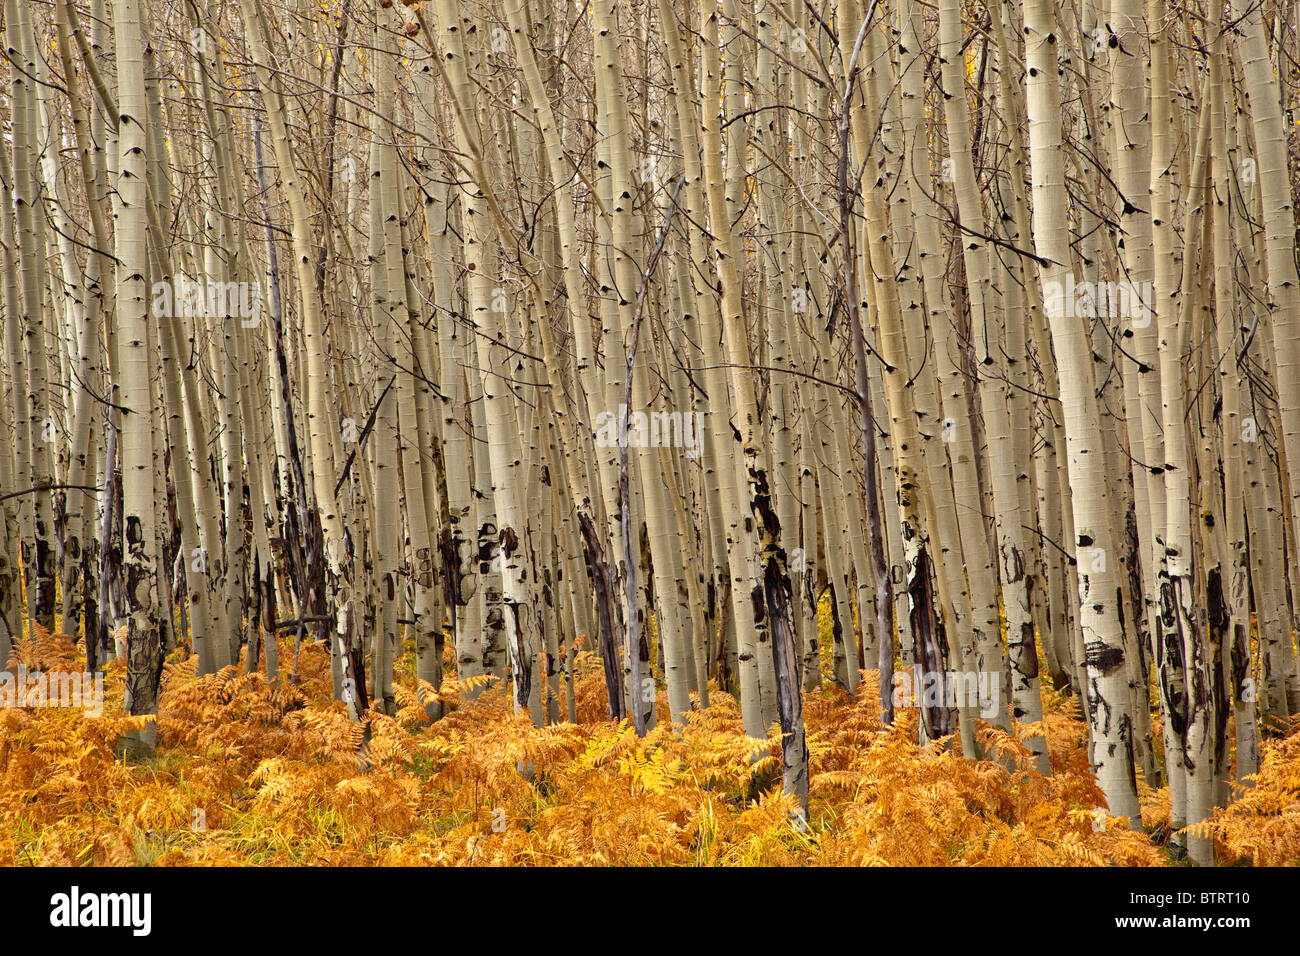 Grove of aspen trees with understory of ferns, autumn on the San Francisco Peaks, Coconino National Forest, USA Stock Photo